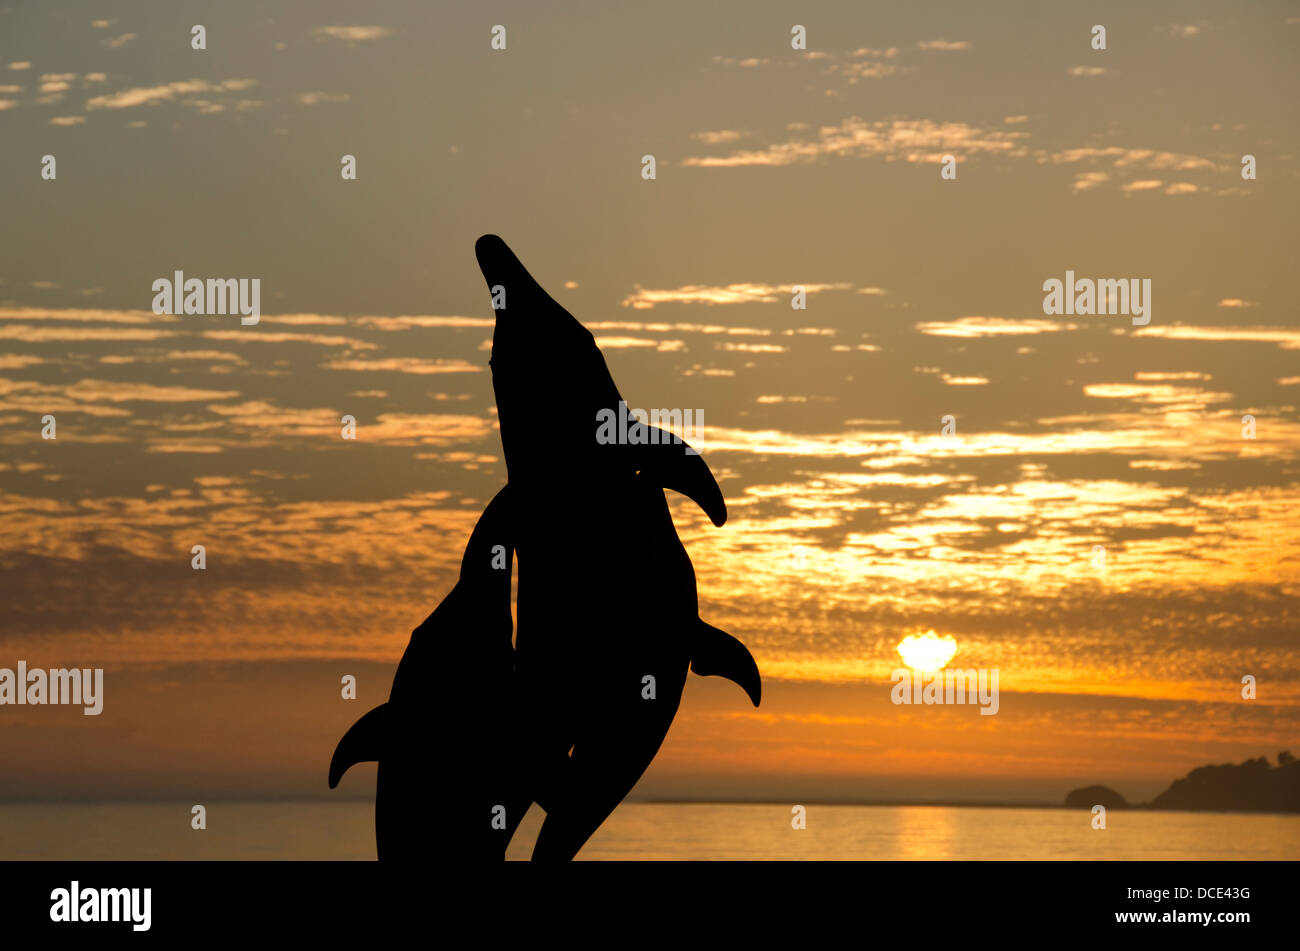 California, Pacific Coast, Pismo Beach. Dolphin sculpture silhouette with Pacific Ocean sunset. Stock Photo